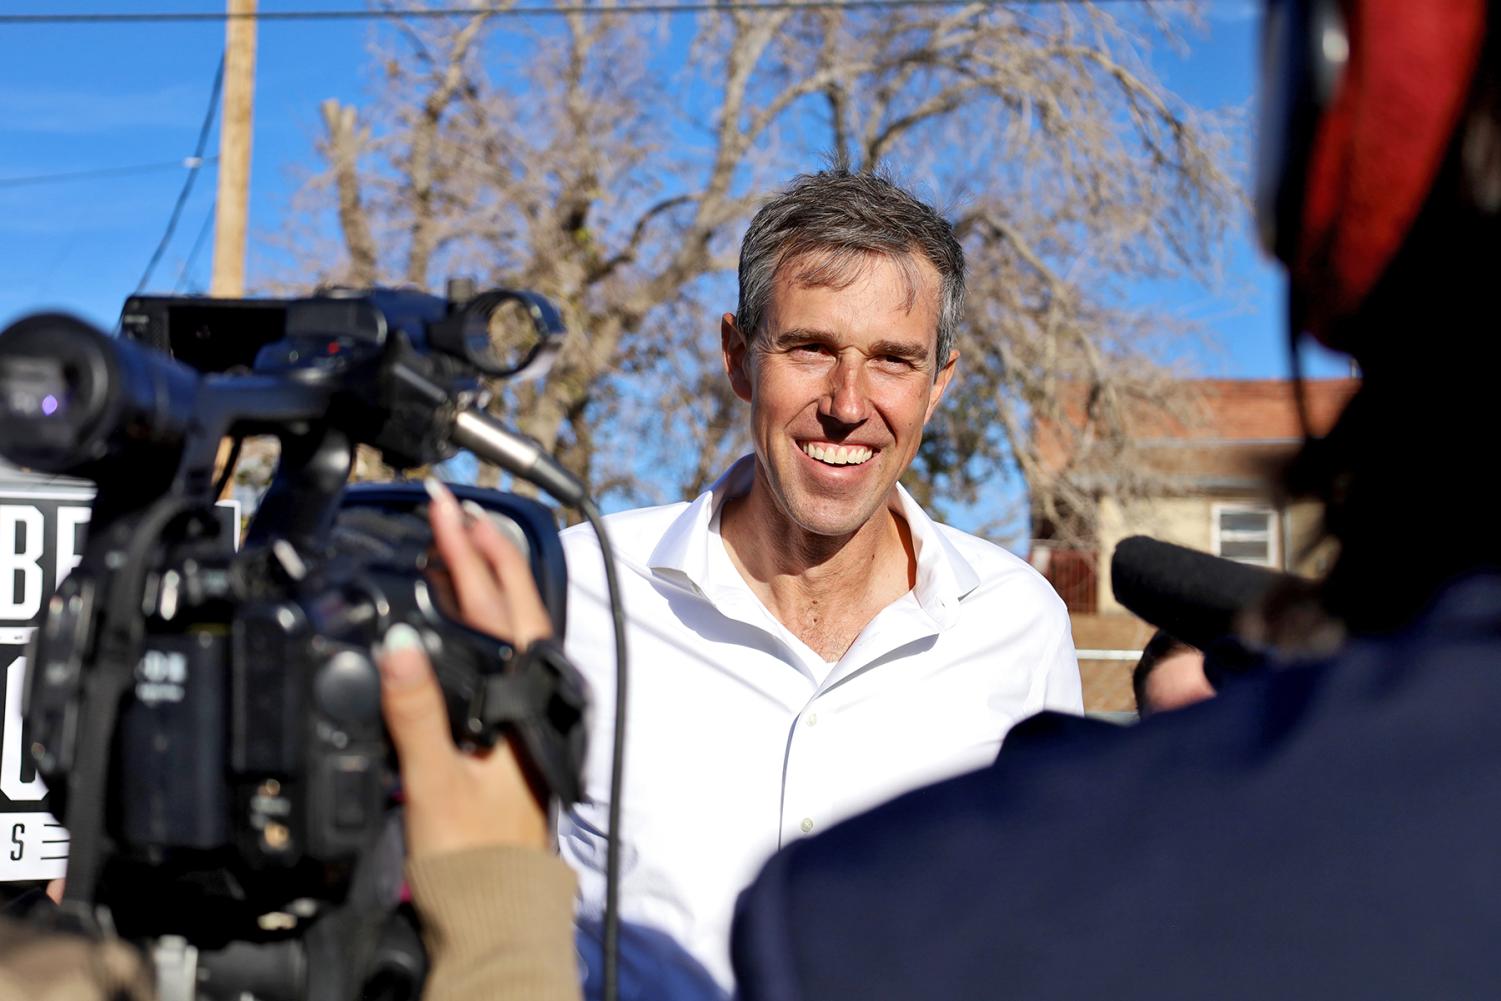 Beto+returns+to+El+Paso+in+hopes+of+gathering+local+support